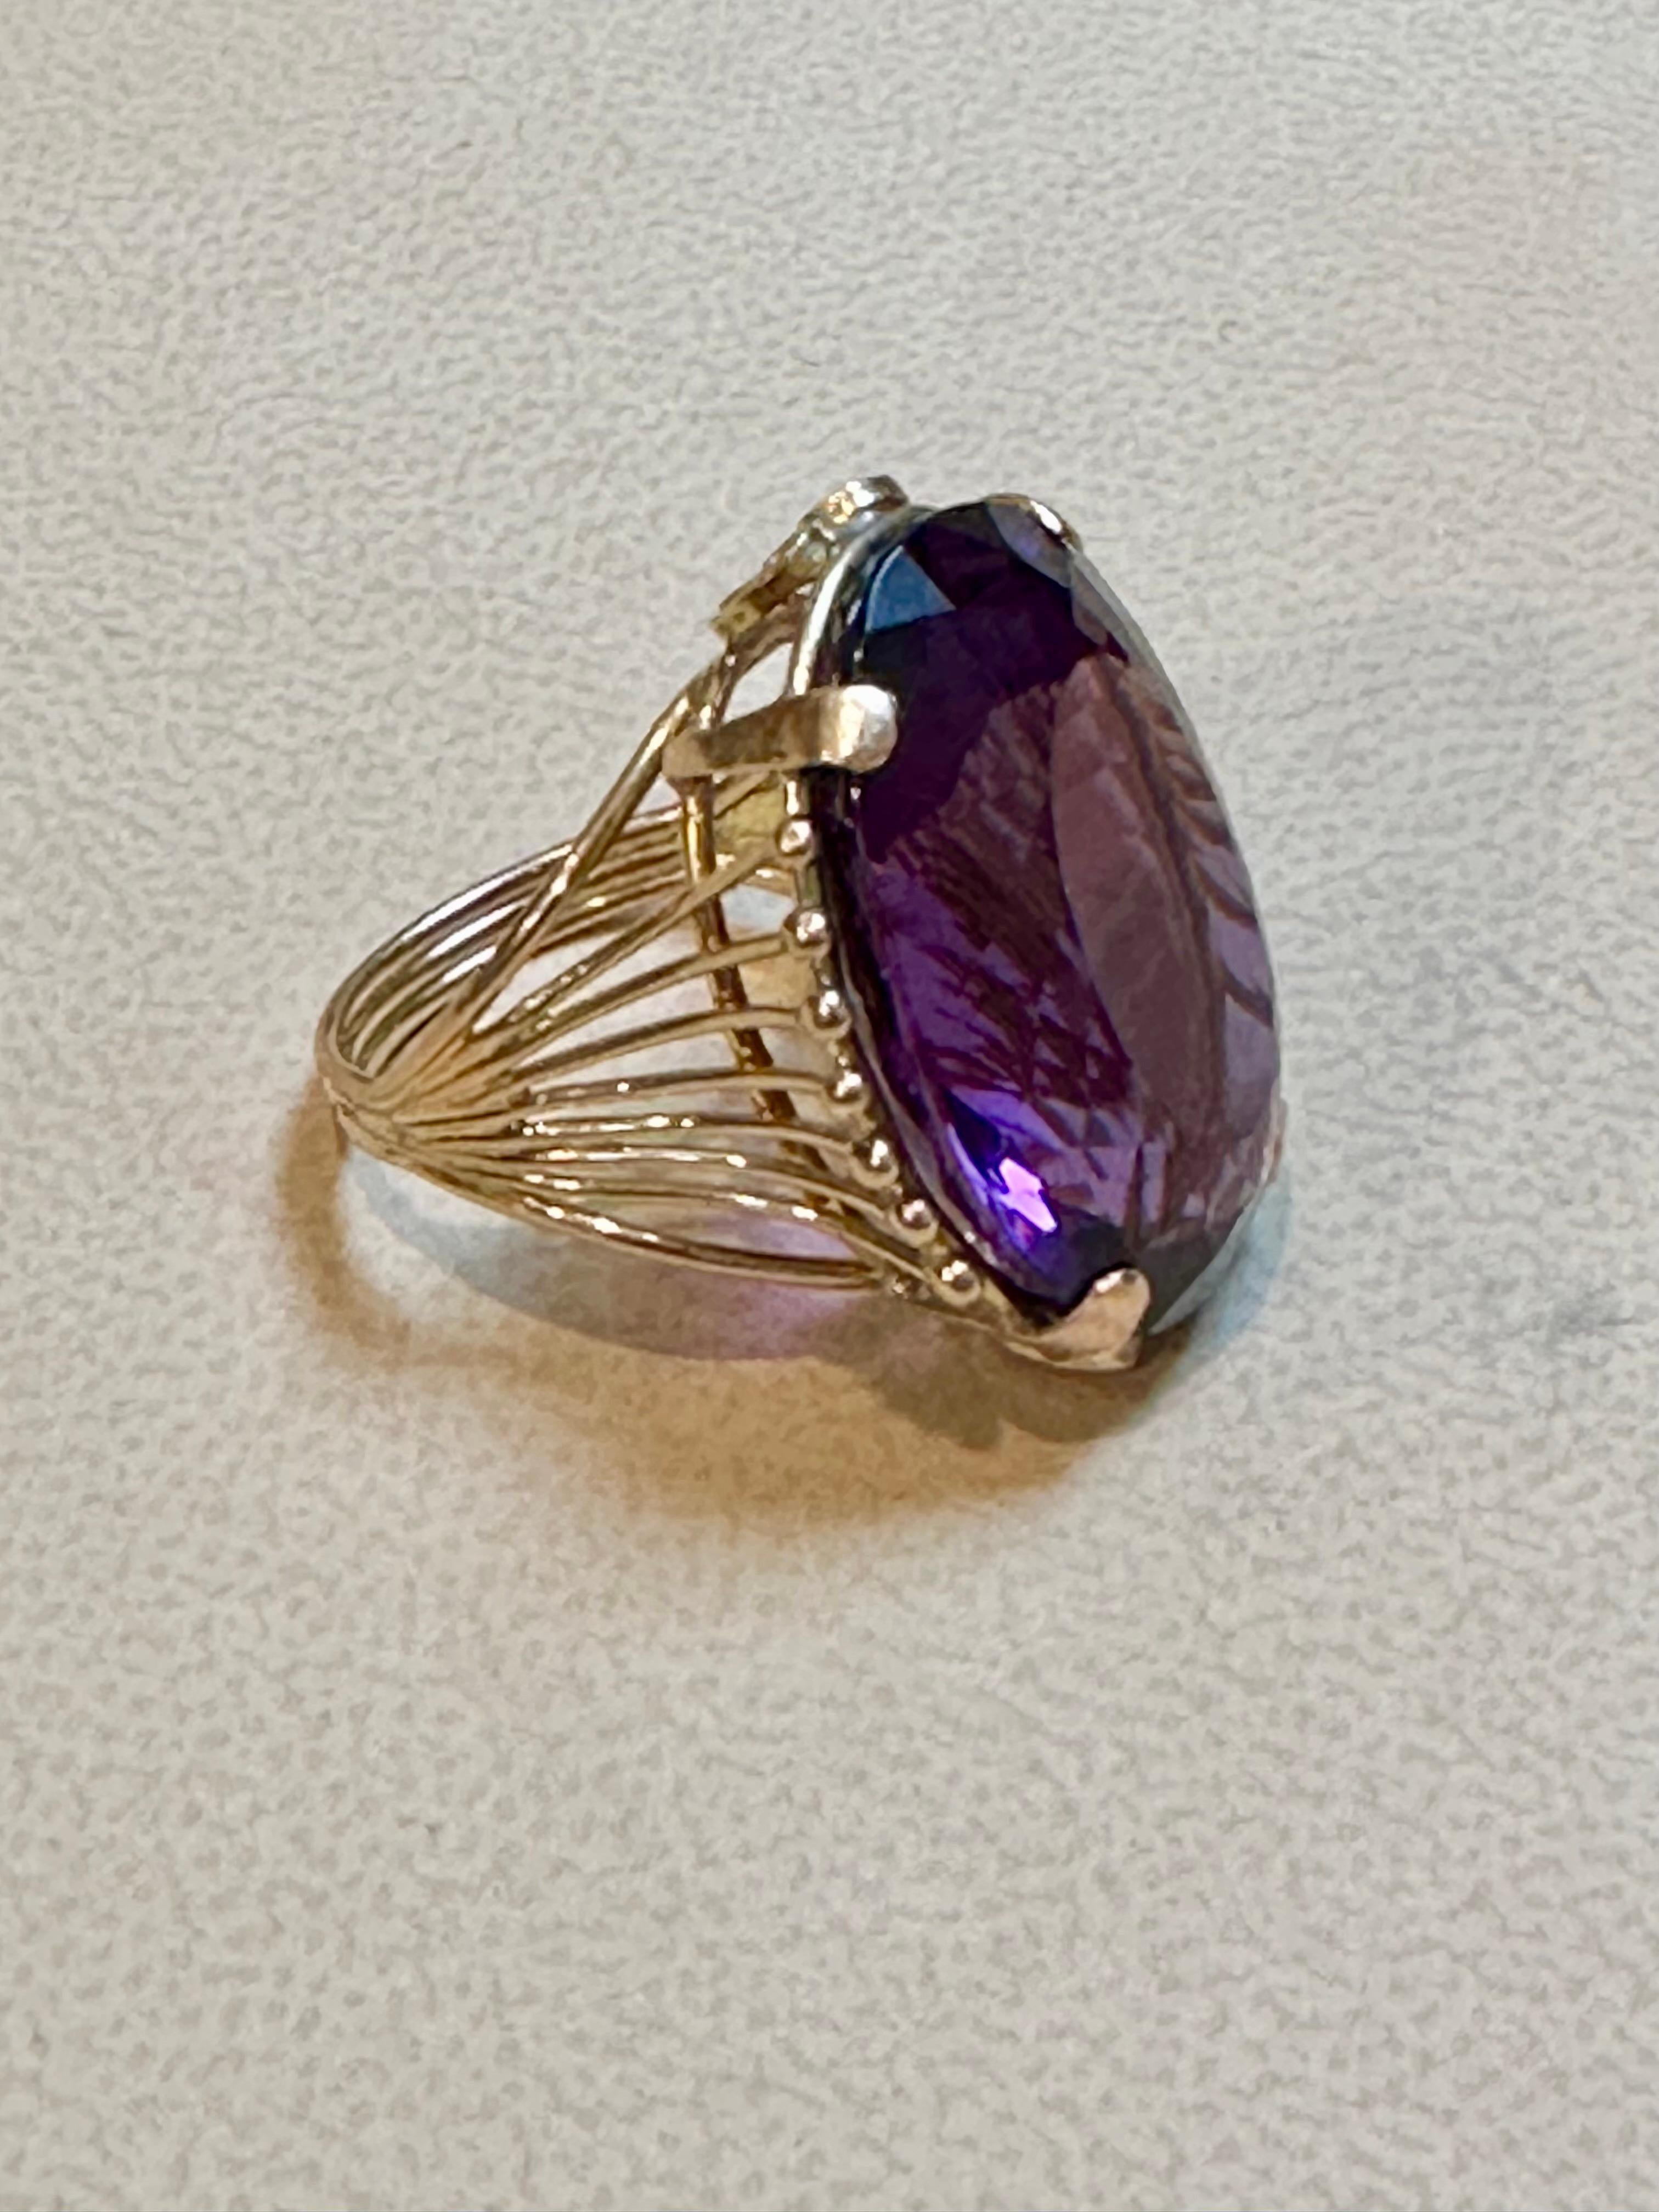 27 Carat Amethyst Cocktail Ring in 14 Karat Yellow Gold For Sale 2